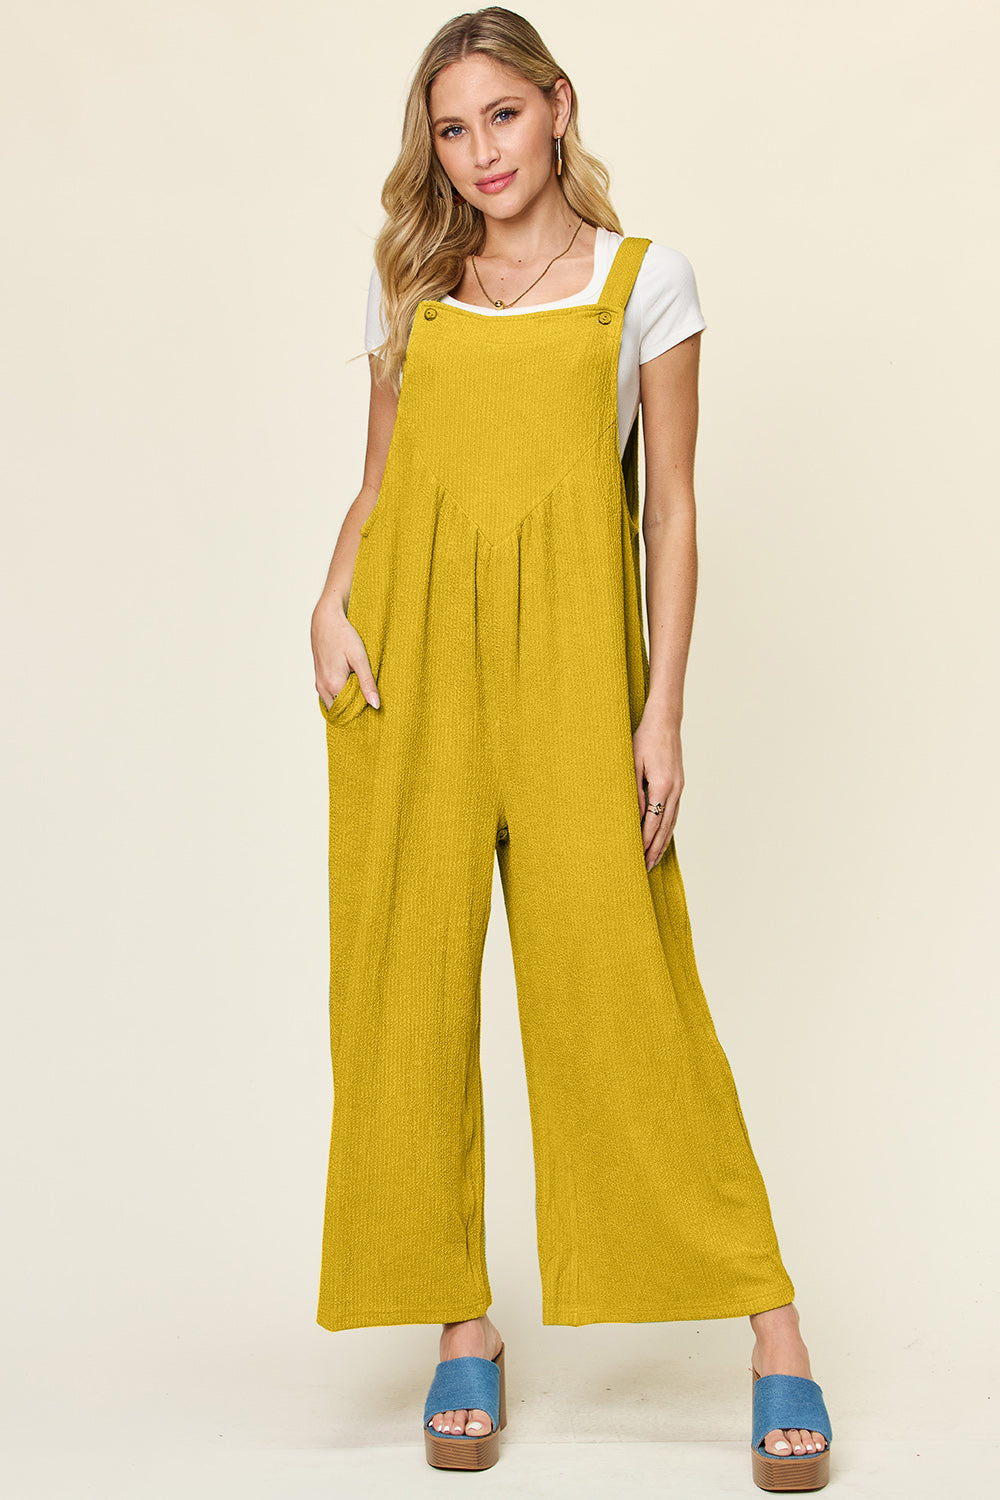 Double Take Full Size Texture Sleeveless Wide Leg Overall